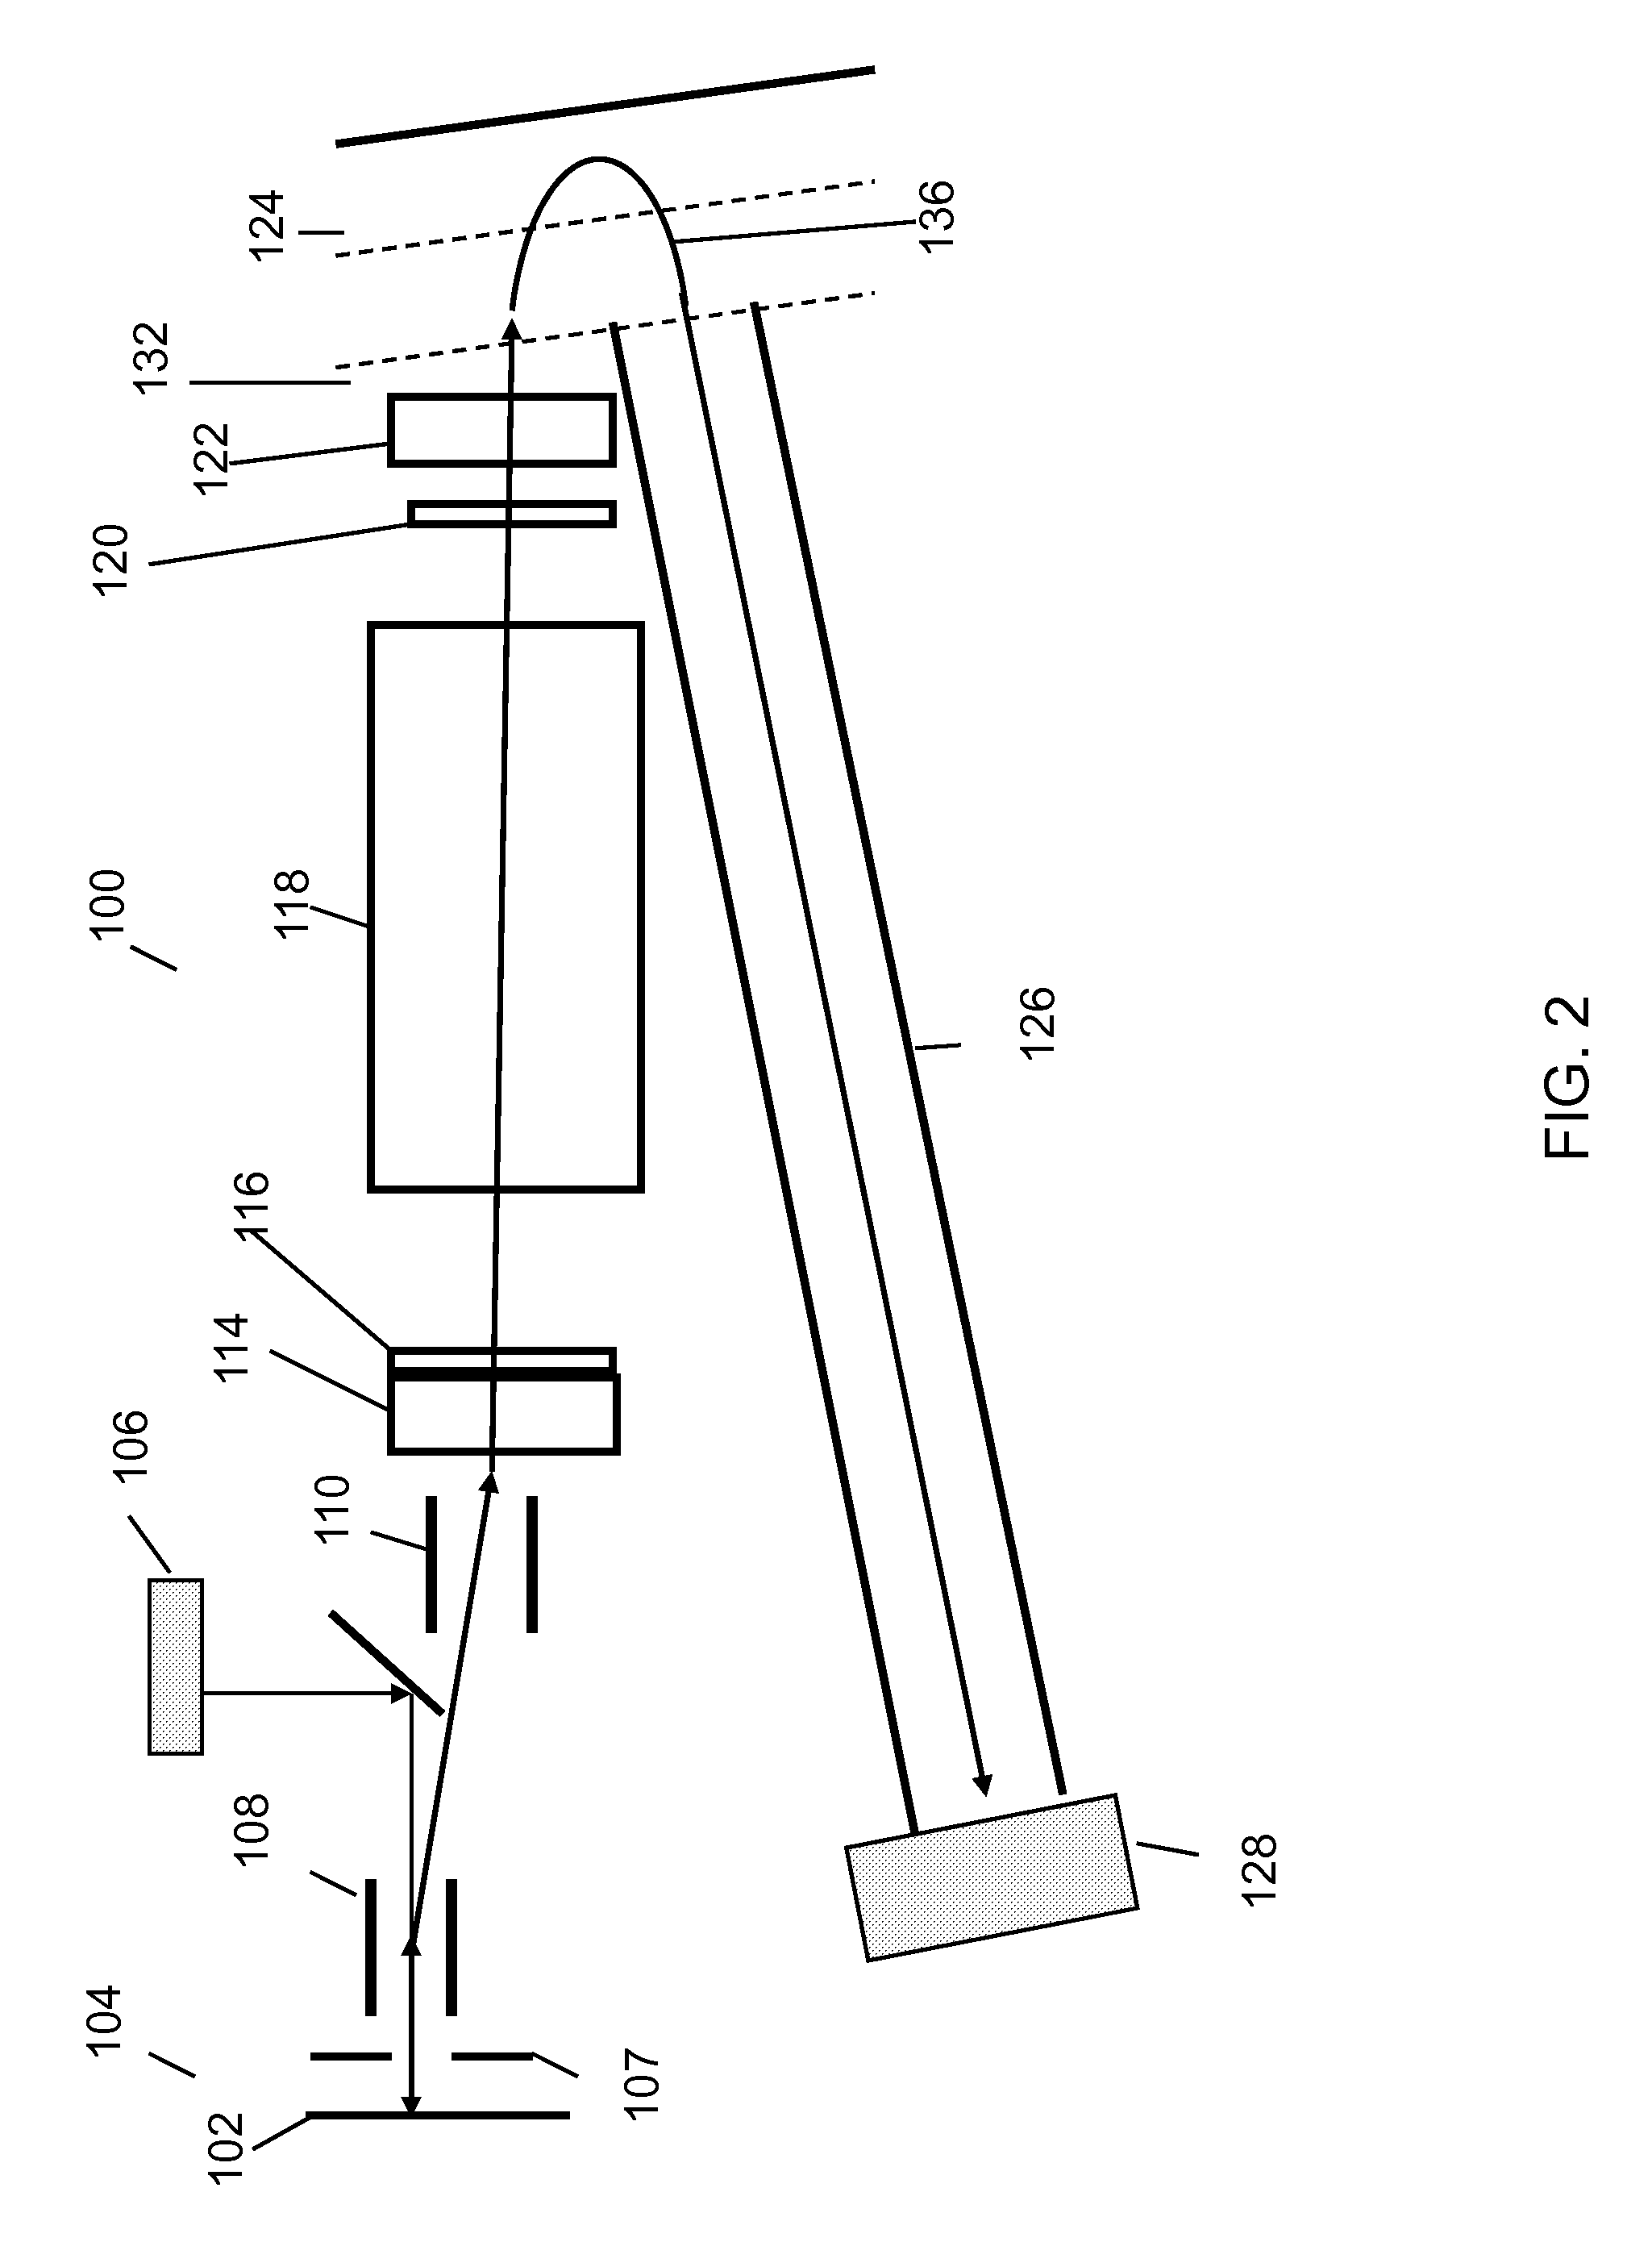 Tandem TOF Mass Spectrometer With Pulsed Accelerator To Reduce Velocity Spread